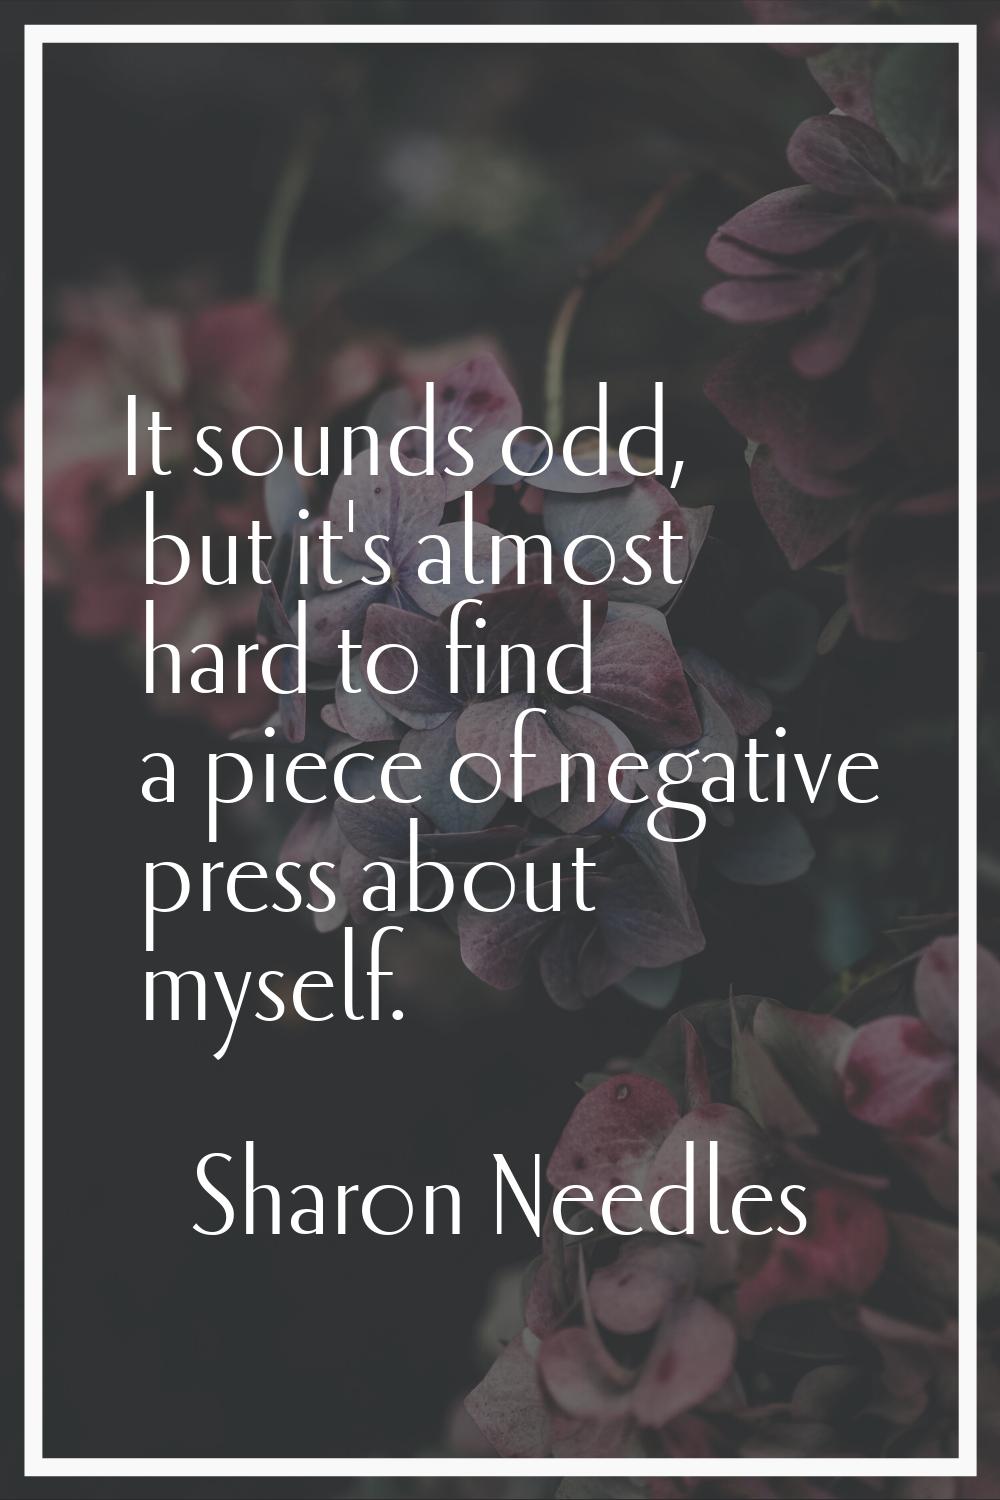 It sounds odd, but it's almost hard to find a piece of negative press about myself.